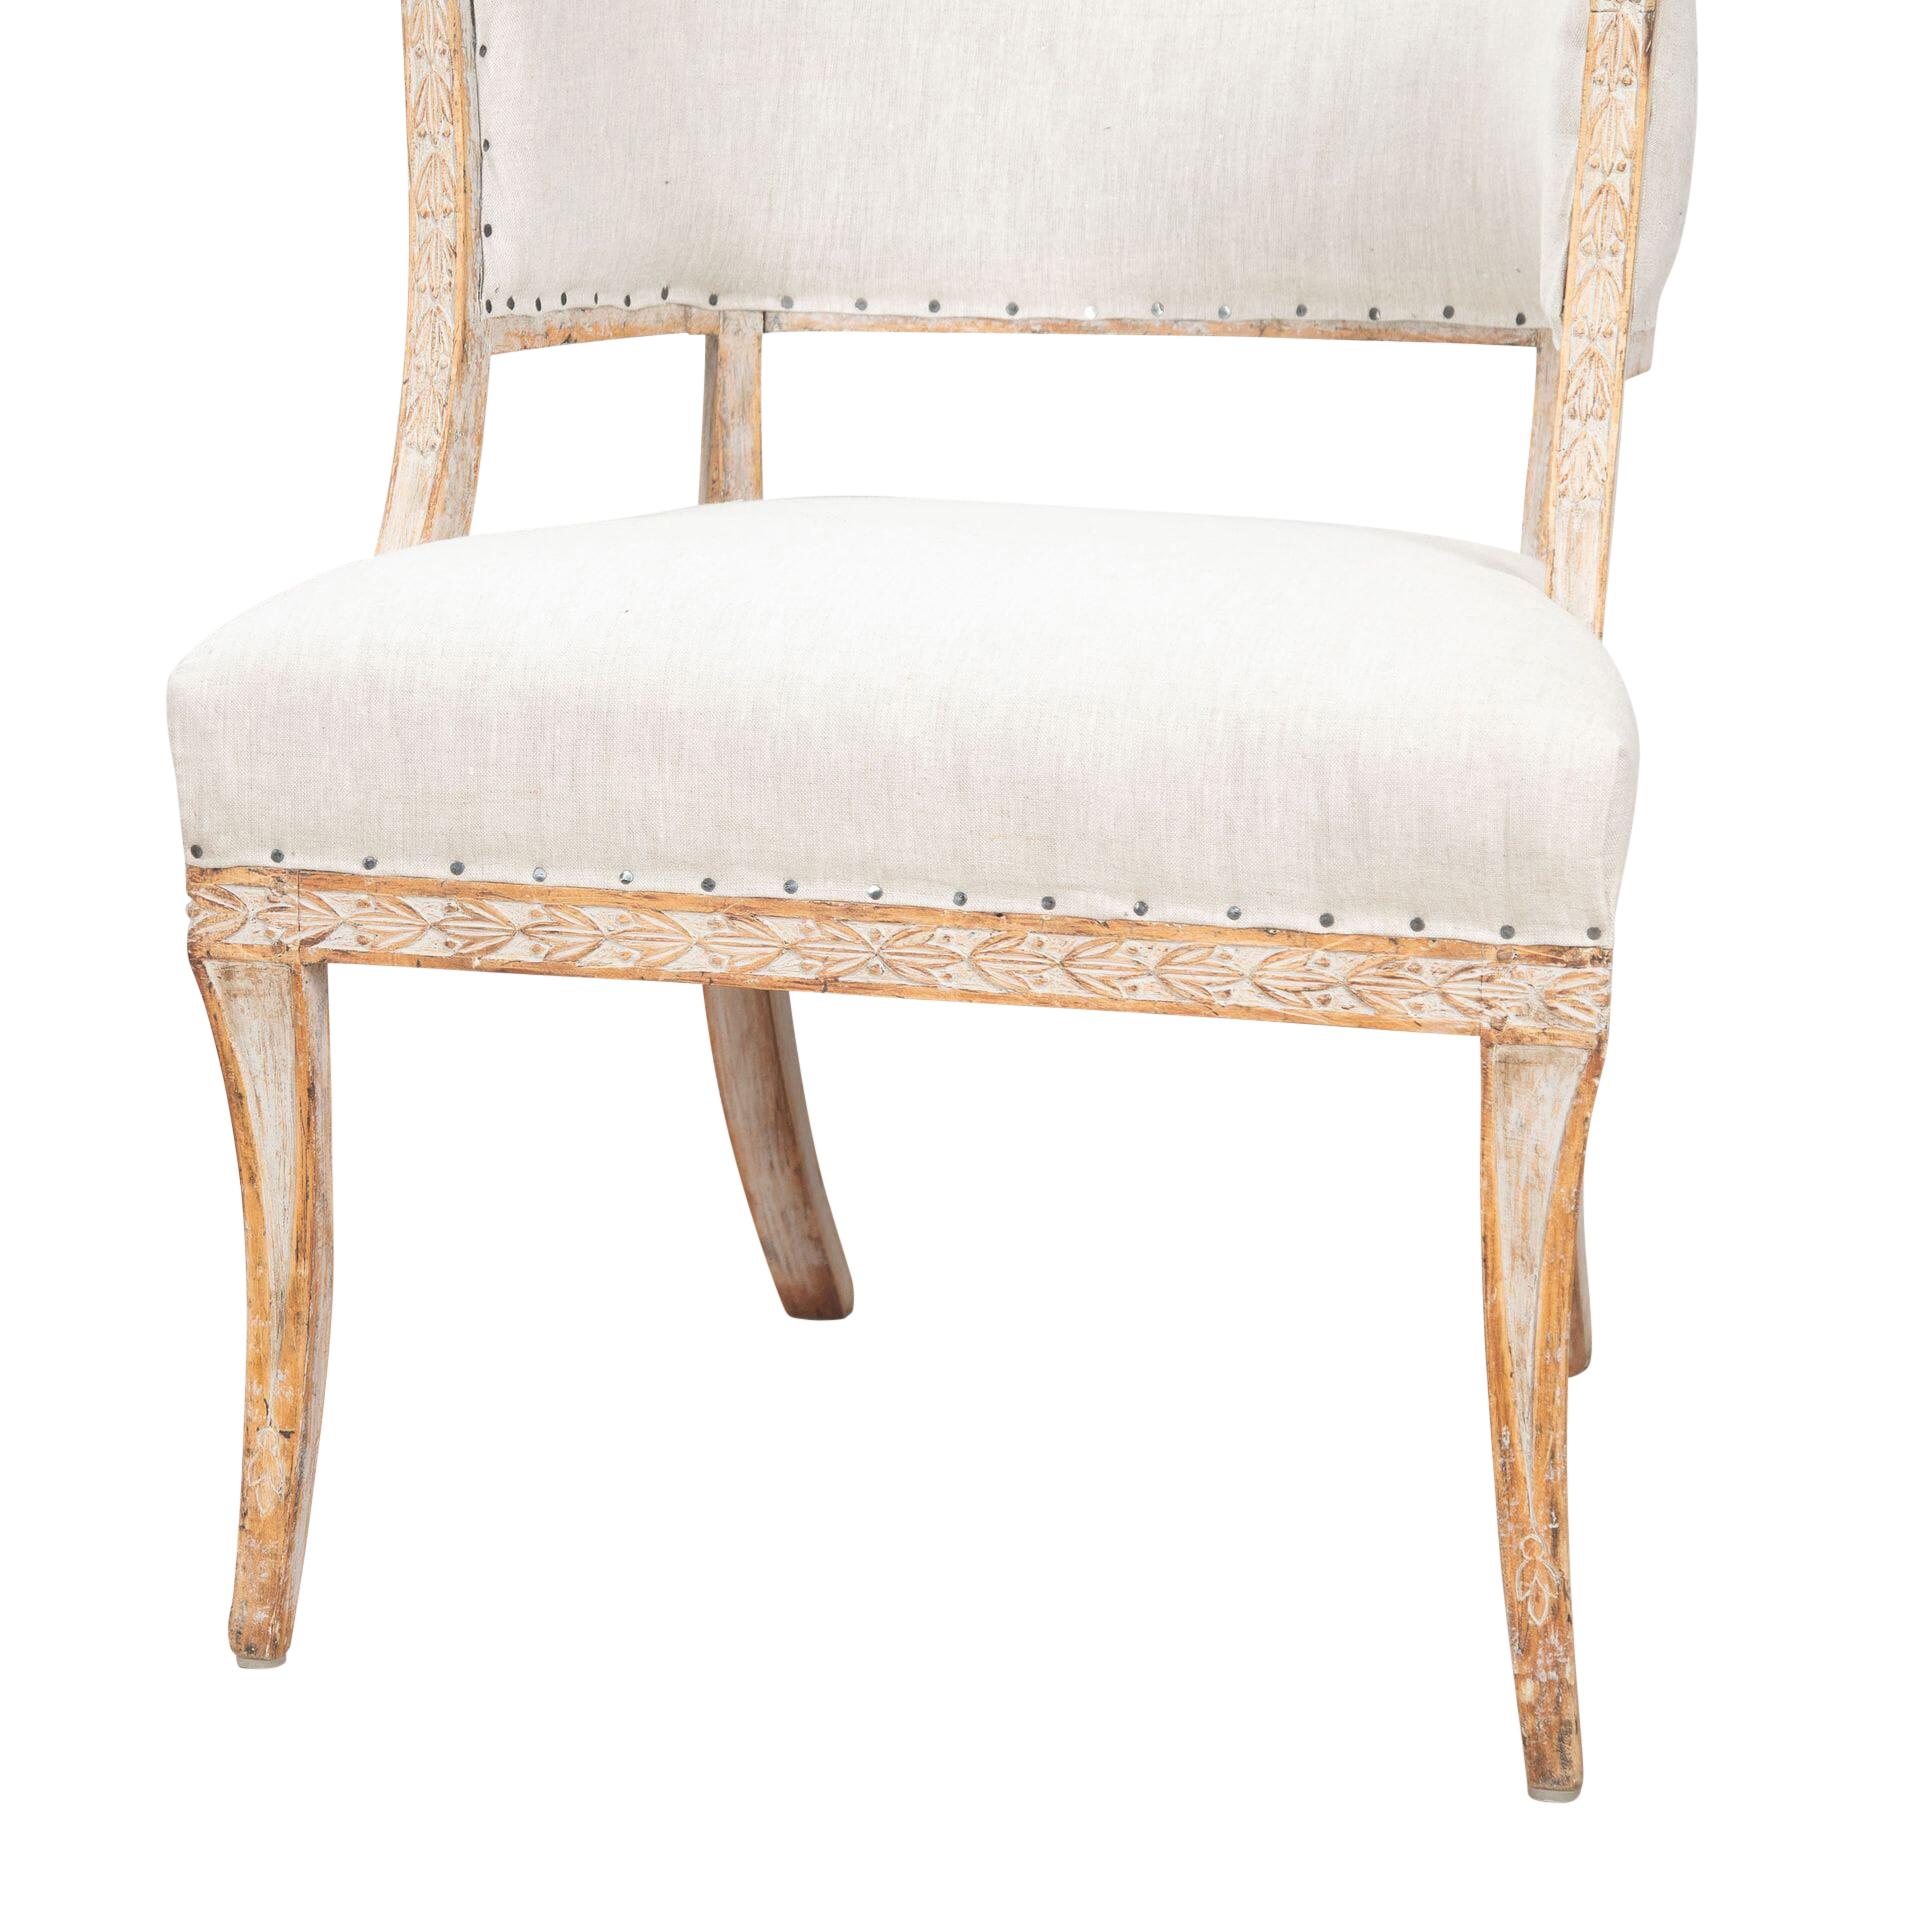 A pair of provincial barrel back chairs in a decorative carved design with stylish kick-out legs.
Repainted in soft grey with newly upholstered linen.